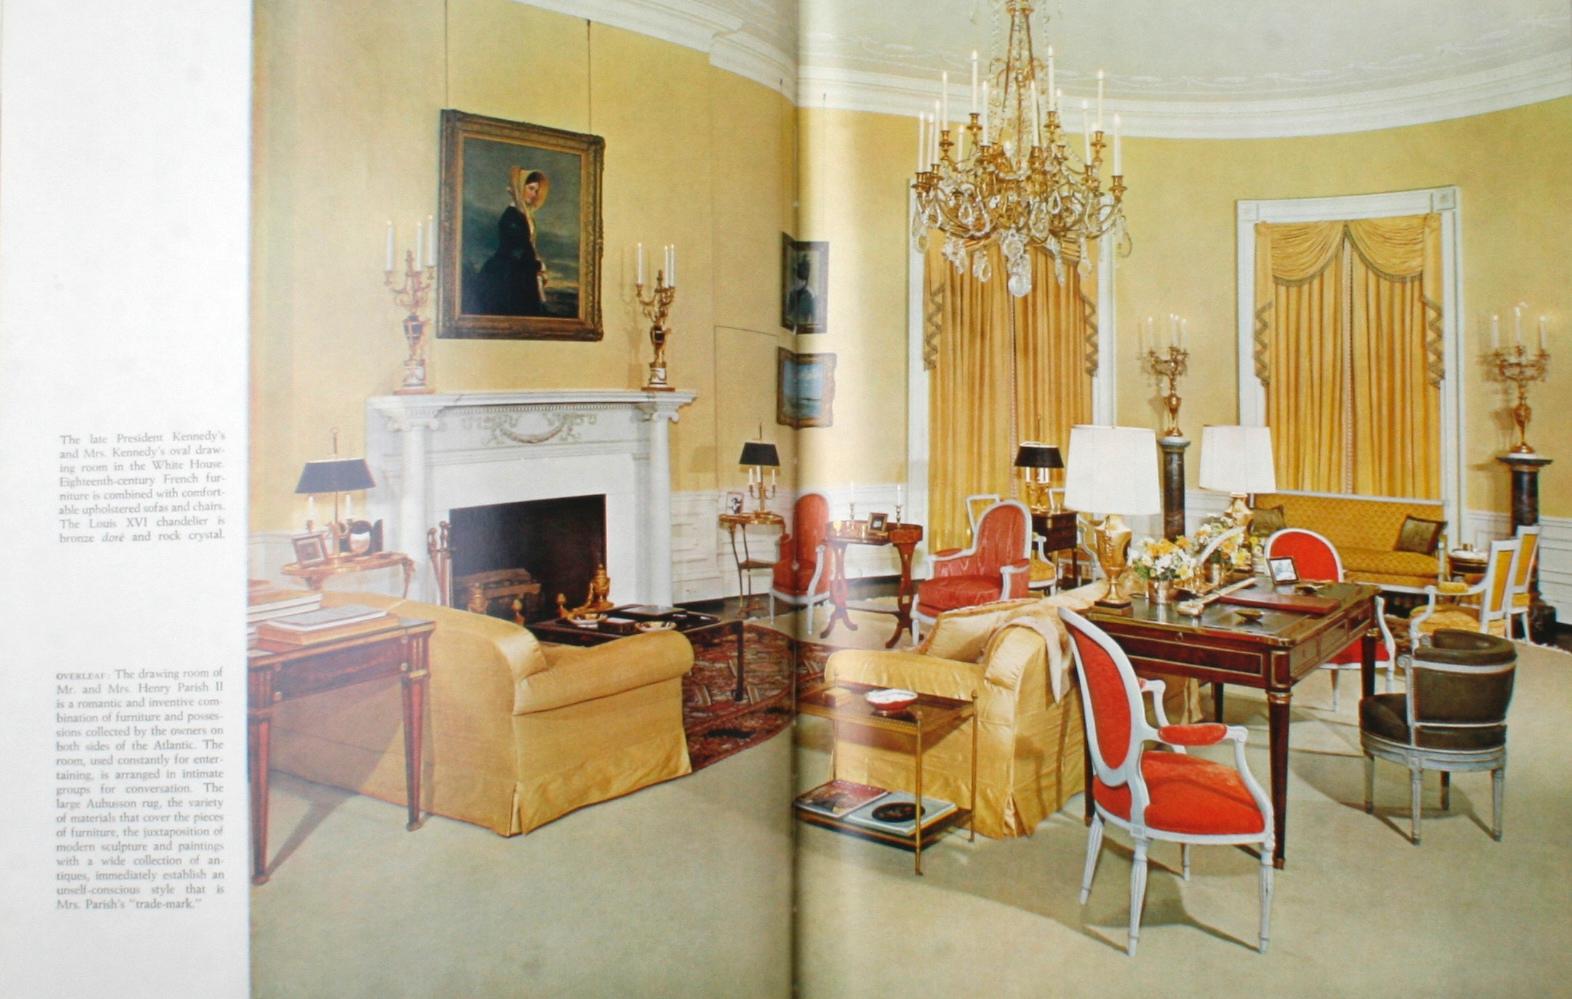 The Finest Rooms by America's Great Decorators, First Edition 5